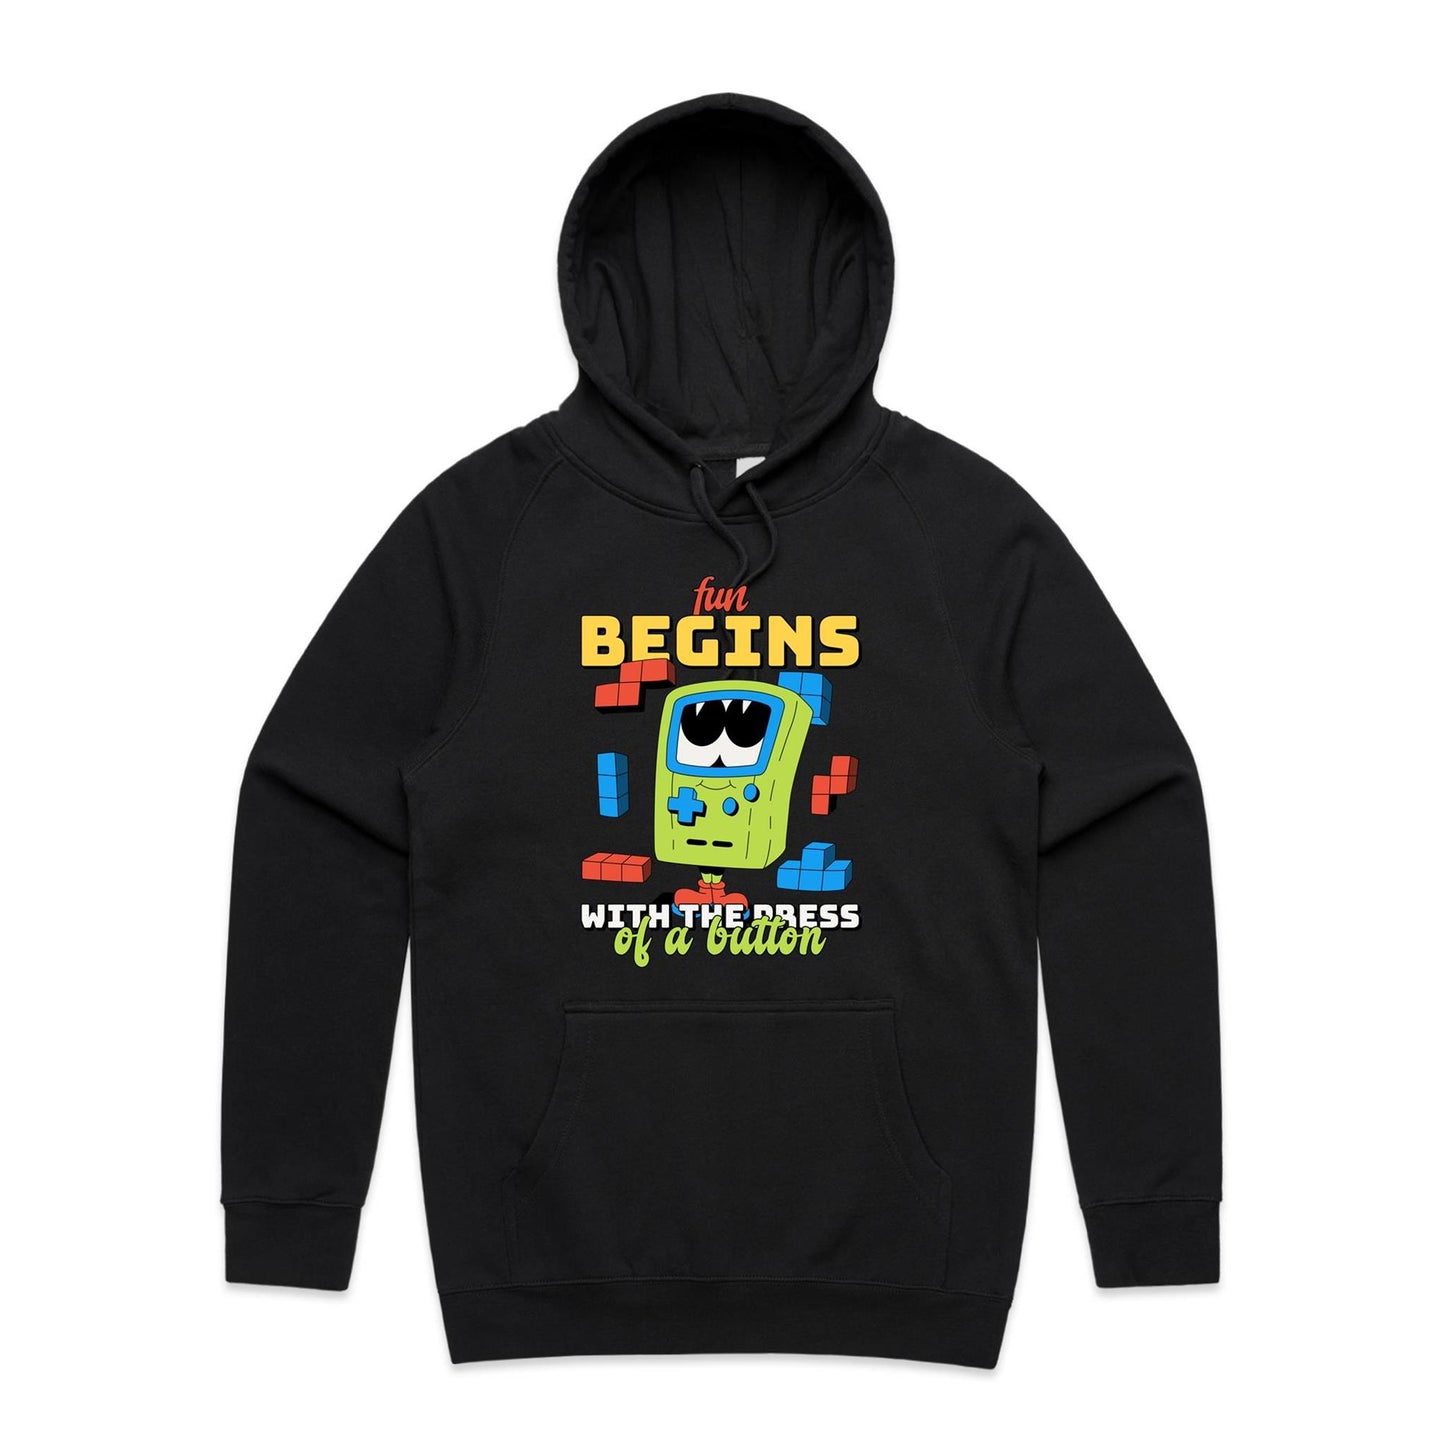 Fun Begins With The Press Of A Button - Supply Hood Black Mens Supply Hoodie Games